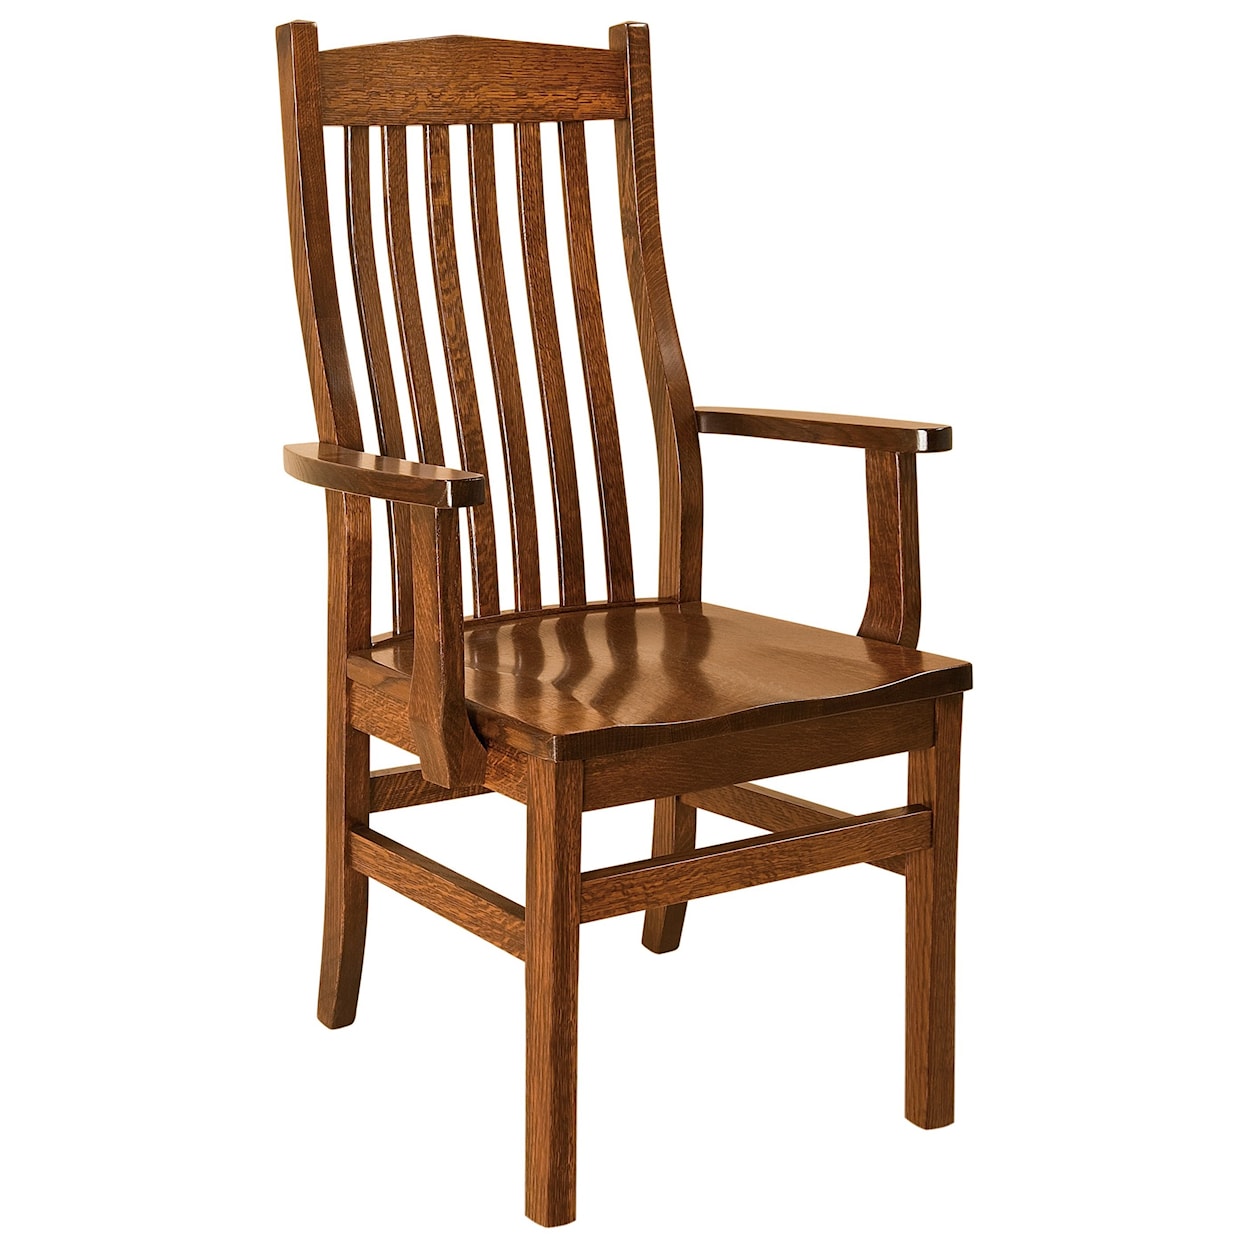 F&N Woodworking Sullivan Arm Chair - Leather Seat